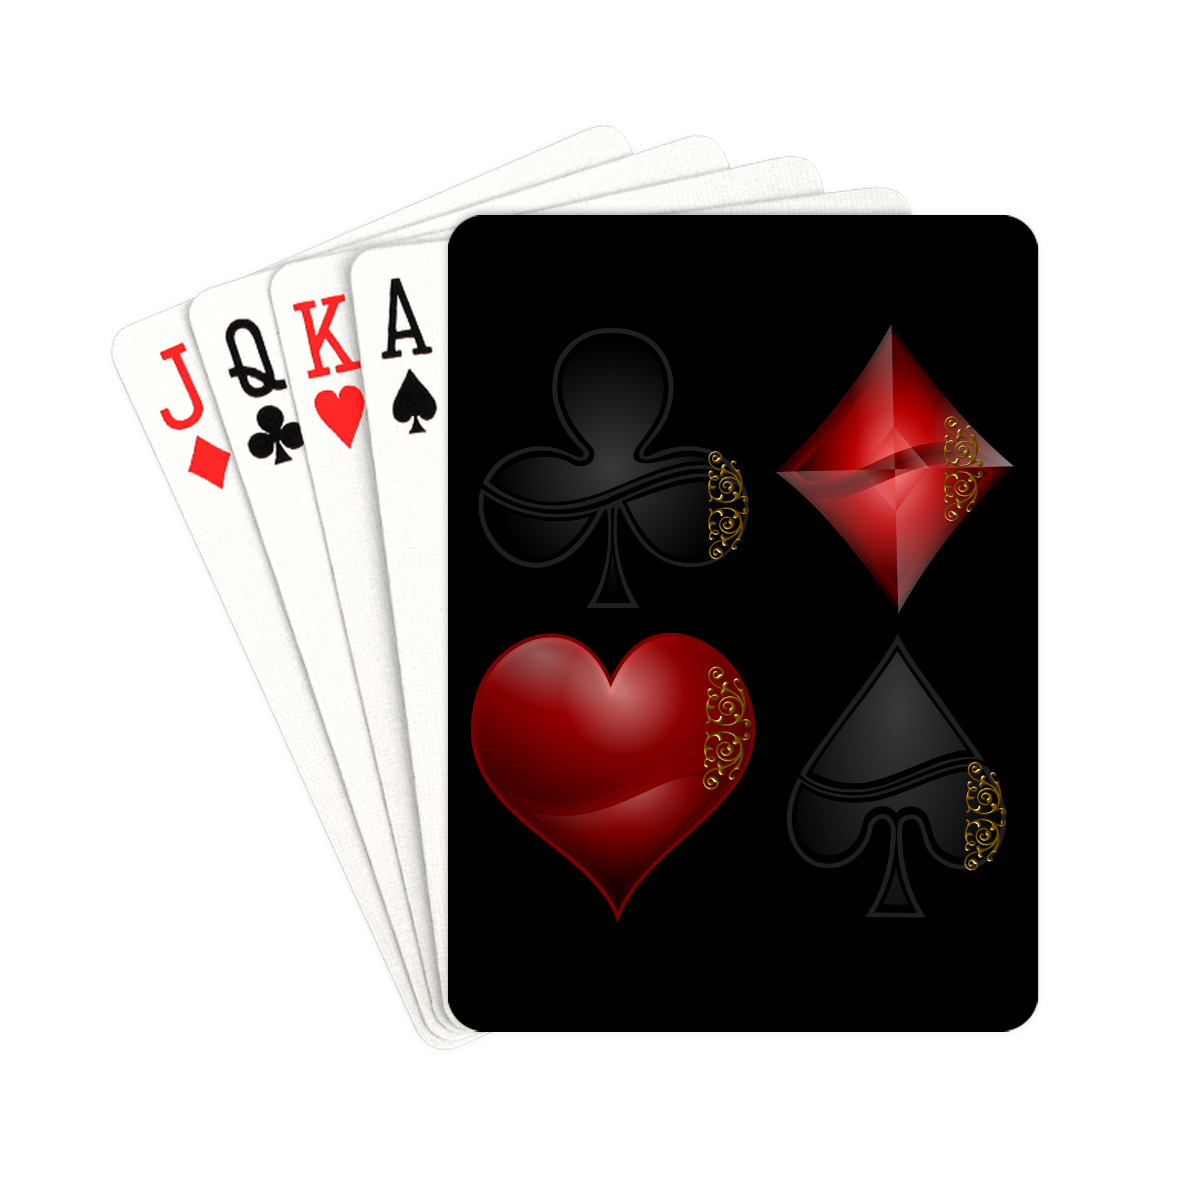 Las Vegas Black and Red Casino Poker Card Shapes on Black Playing Cards 2.5"x3.5"